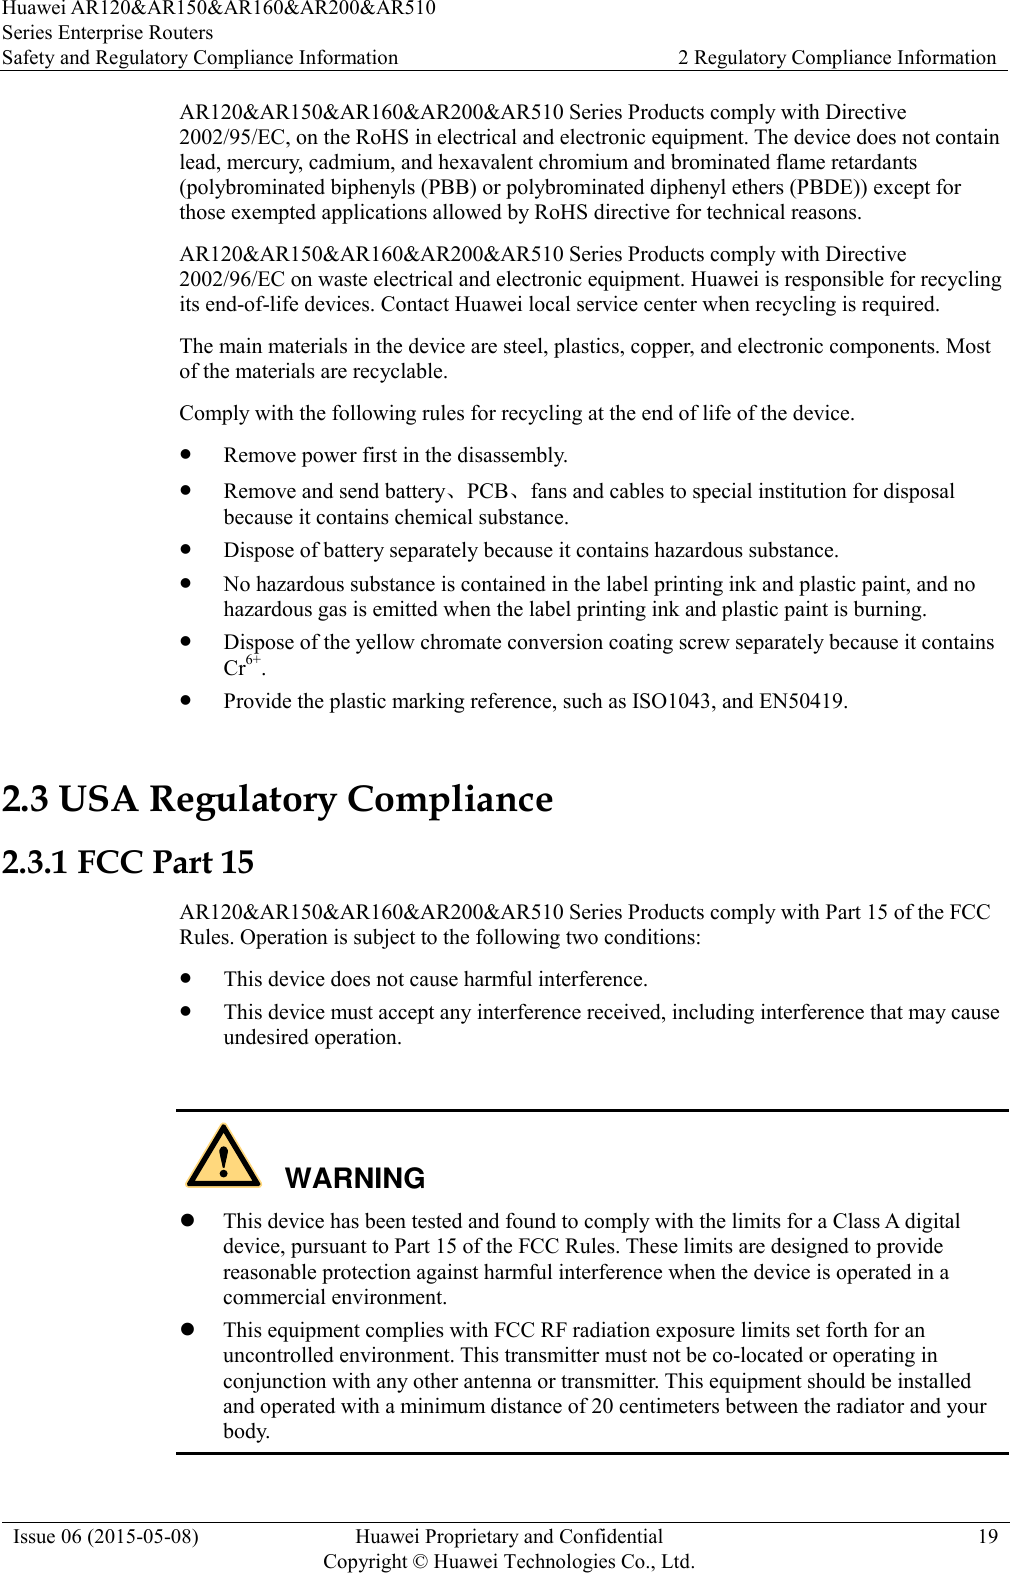 Huawei AR120&amp;AR150&amp;AR160&amp;AR200&amp;AR510 Series Enterprise Routers Safety and Regulatory Compliance Information 2 Regulatory Compliance Information  Issue 06 (2015-05-08) Huawei Proprietary and Confidential           Copyright © Huawei Technologies Co., Ltd. 19  AR120&amp;AR150&amp;AR160&amp;AR200&amp;AR510 Series Products comply with Directive 2002/95/EC, on the RoHS in electrical and electronic equipment. The device does not contain lead, mercury, cadmium, and hexavalent chromium and brominated flame retardants (polybrominated biphenyls (PBB) or polybrominated diphenyl ethers (PBDE)) except for those exempted applications allowed by RoHS directive for technical reasons. AR120&amp;AR150&amp;AR160&amp;AR200&amp;AR510 Series Products comply with Directive 2002/96/EC on waste electrical and electronic equipment. Huawei is responsible for recycling its end-of-life devices. Contact Huawei local service center when recycling is required. The main materials in the device are steel, plastics, copper, and electronic components. Most of the materials are recyclable. Comply with the following rules for recycling at the end of life of the device.  Remove power first in the disassembly.  Remove and send battery、PCB、fans and cables to special institution for disposal because it contains chemical substance.  Dispose of battery separately because it contains hazardous substance.  No hazardous substance is contained in the label printing ink and plastic paint, and no hazardous gas is emitted when the label printing ink and plastic paint is burning.  Dispose of the yellow chromate conversion coating screw separately because it contains Cr6+.  Provide the plastic marking reference, such as ISO1043, and EN50419. 2.3 USA Regulatory Compliance 2.3.1 FCC Part 15 AR120&amp;AR150&amp;AR160&amp;AR200&amp;AR510 Series Products comply with Part 15 of the FCC Rules. Operation is subject to the following two conditions:  This device does not cause harmful interference.  This device must accept any interference received, including interference that may cause undesired operation.      This device has been tested and found to comply with the limits for a Class A digital device, pursuant to Part 15 of the FCC Rules. These limits are designed to provide reasonable protection against harmful interference when the device is operated in a commercial environment.  This equipment complies with FCC RF radiation exposure limits set forth for an uncontrolled environment. This transmitter must not be co-located or operating in conjunction with any other antenna or transmitter. This equipment should be installed and operated with a minimum distance of 20 centimeters between the radiator and your body. WARNING